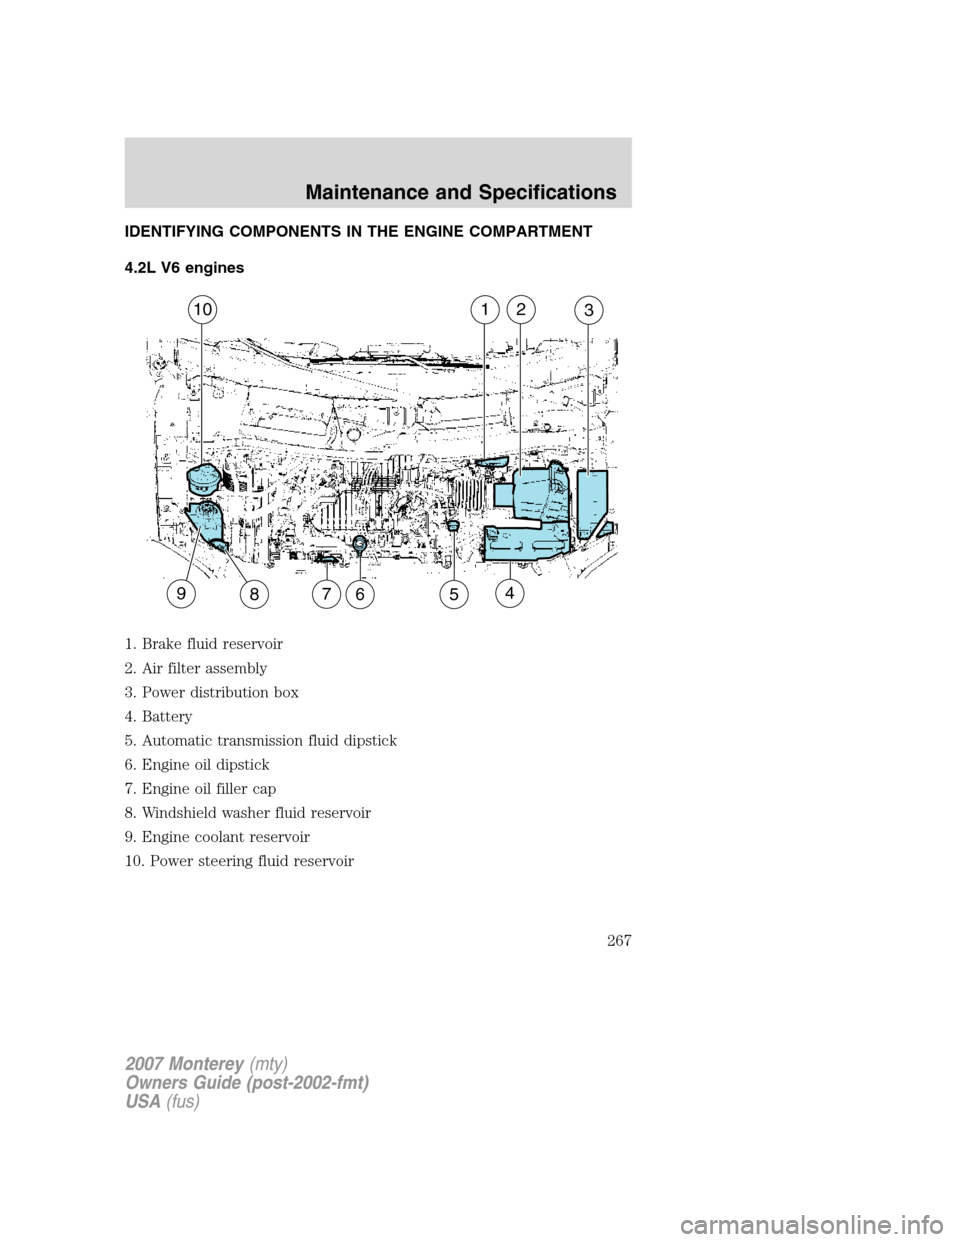 Mercury Monterey 2007  Owners Manuals IDENTIFYING COMPONENTS IN THE ENGINE COMPARTMENT
4.2L V6 engines
1. Brake fluid reservoir
2. Air filter assembly
3. Power distribution box
4. Battery
5. Automatic transmission fluid dipstick
6. Engine